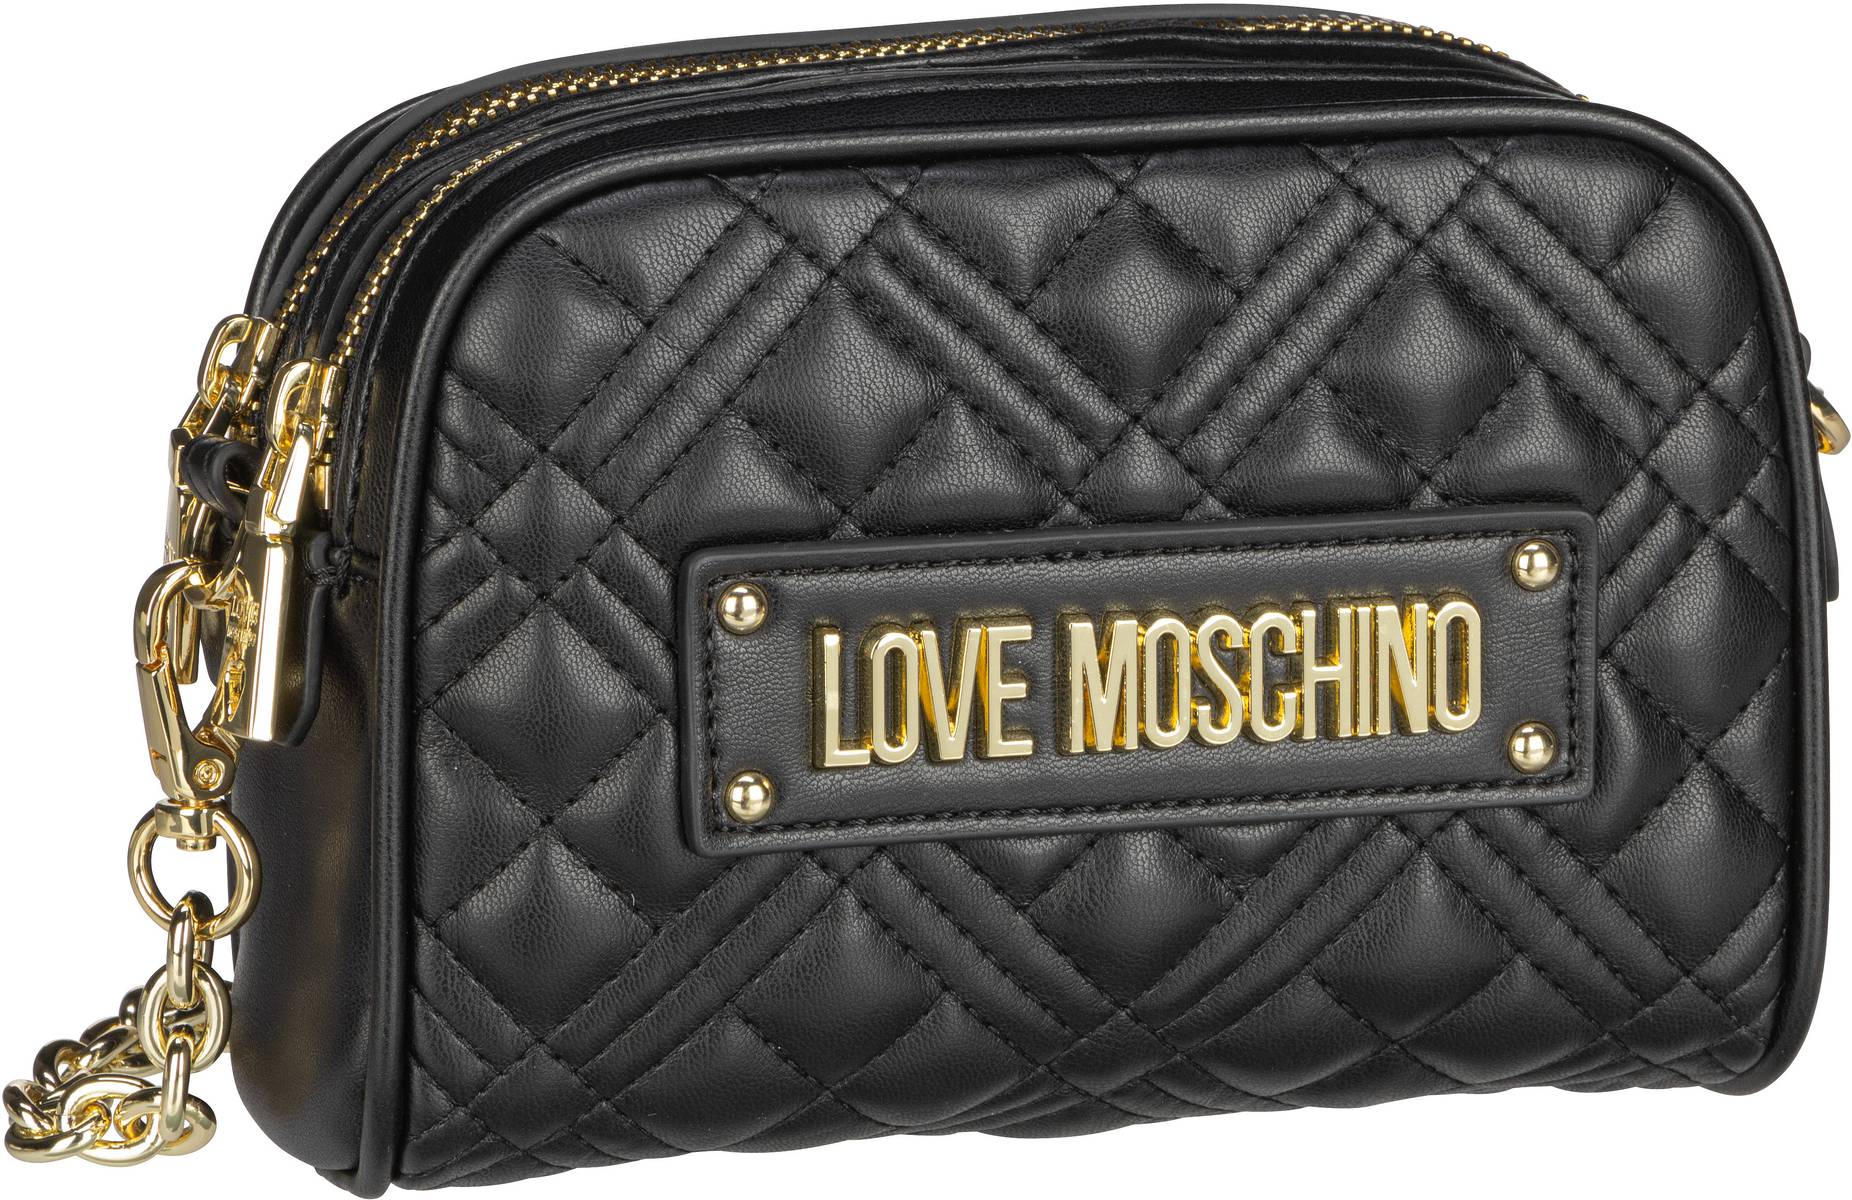 Love Moschino Quilted Bag 4016 - Black